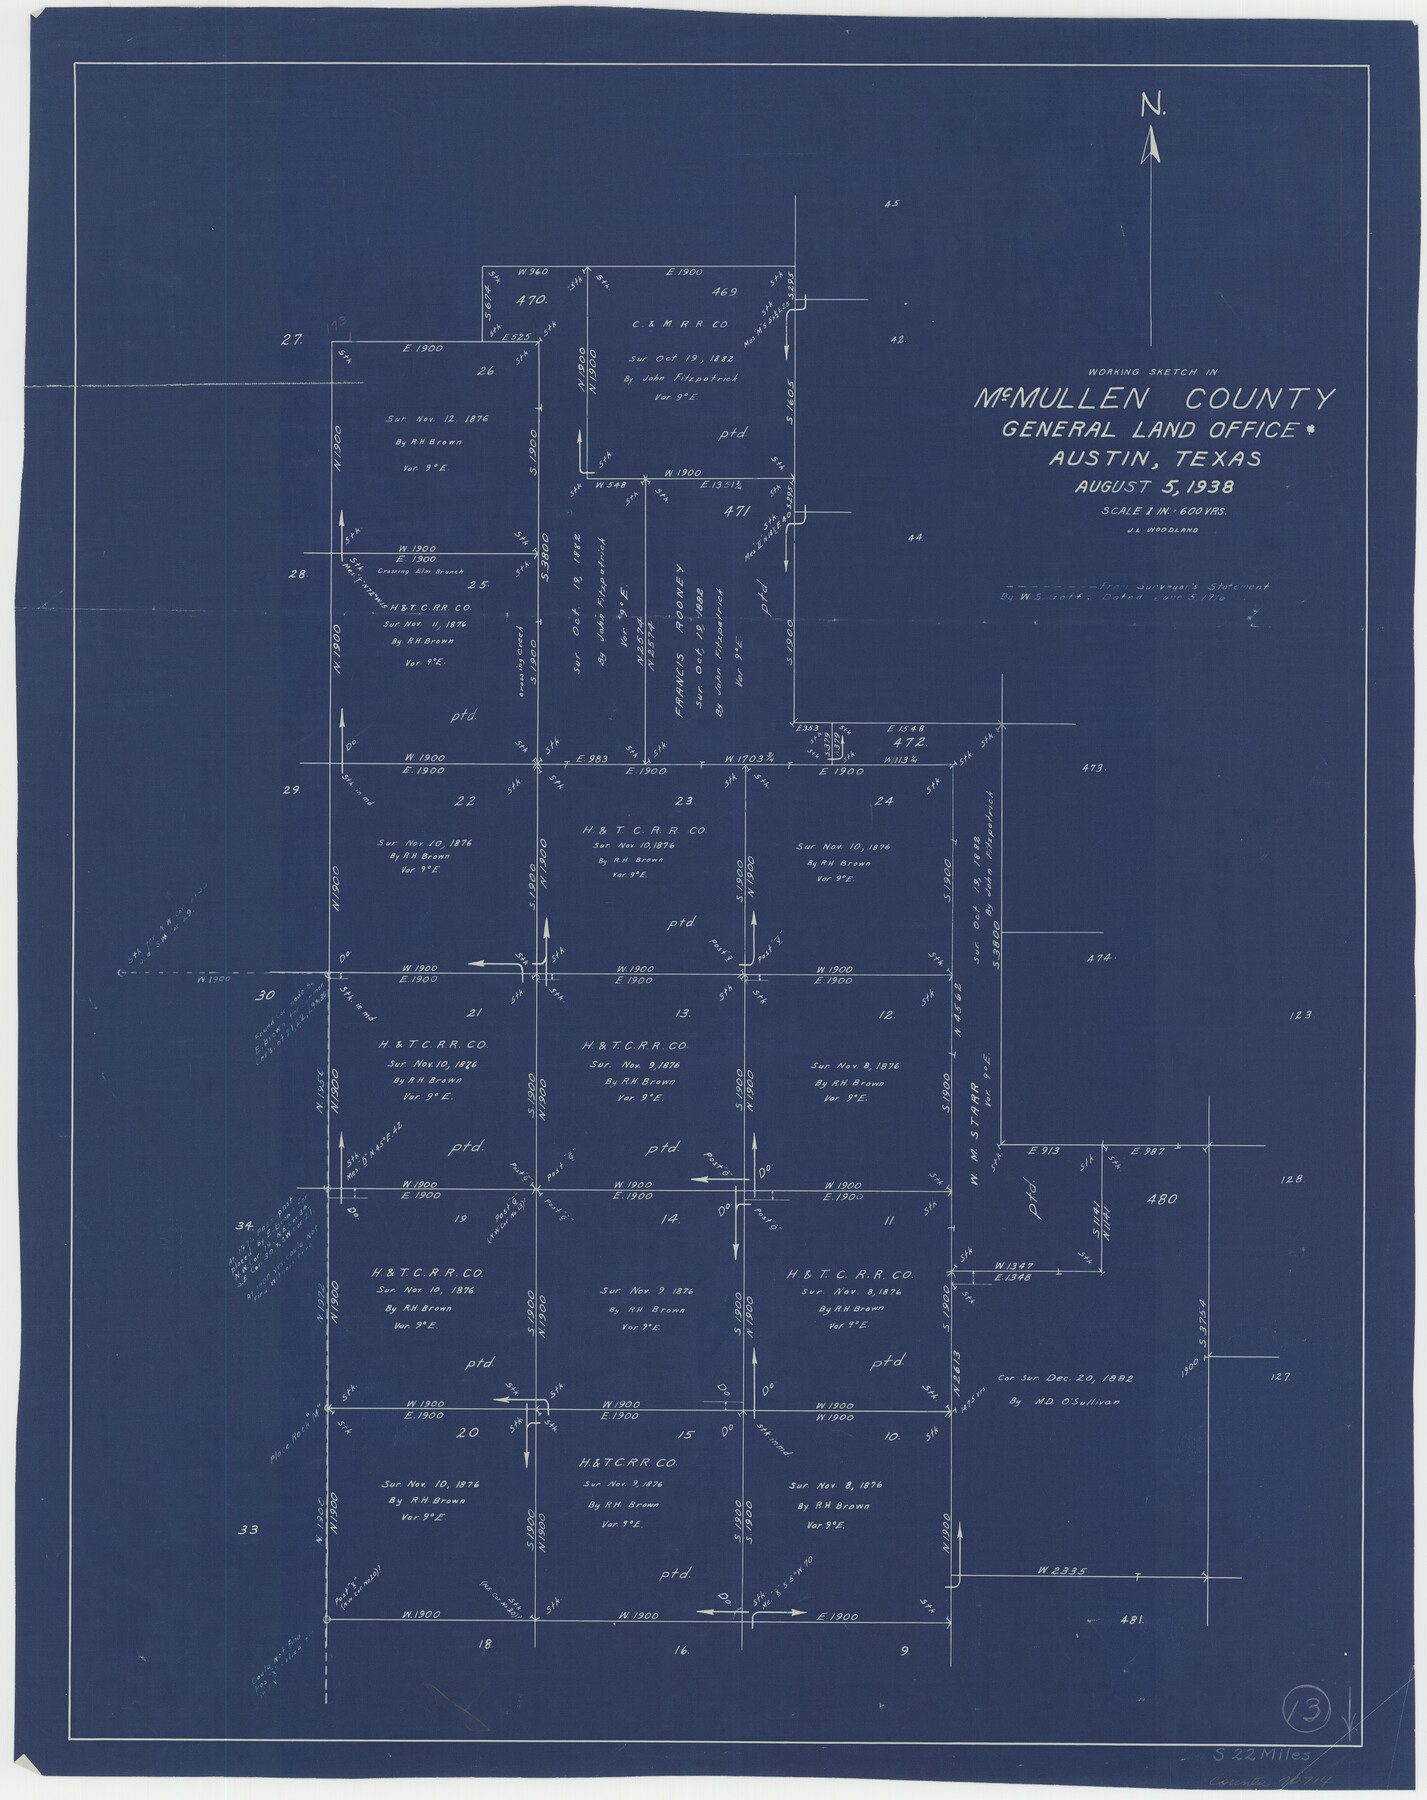 70714, McMullen County Working Sketch 13, General Map Collection